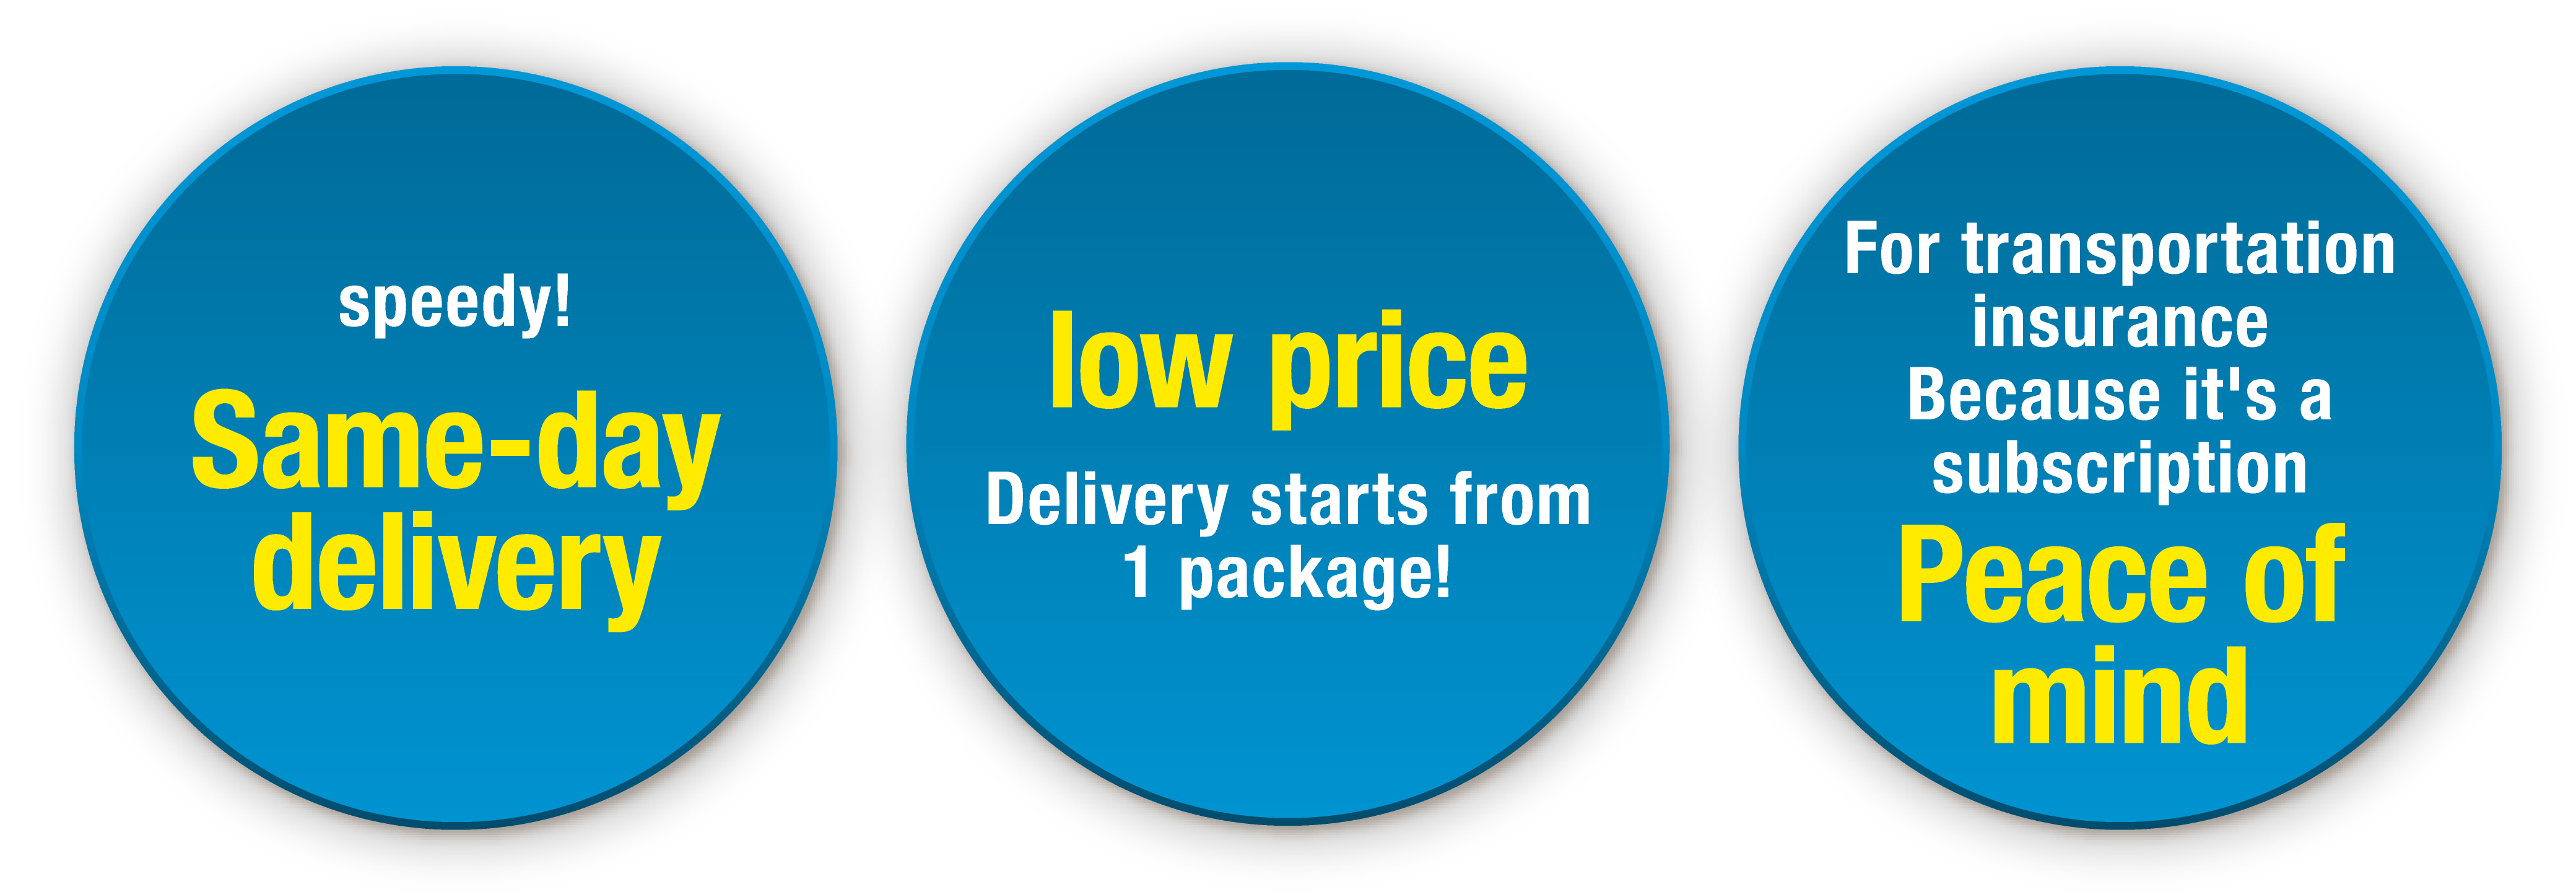 speedy!
Same-day delivery low price
Delivery starts from 1 package! Contact us here